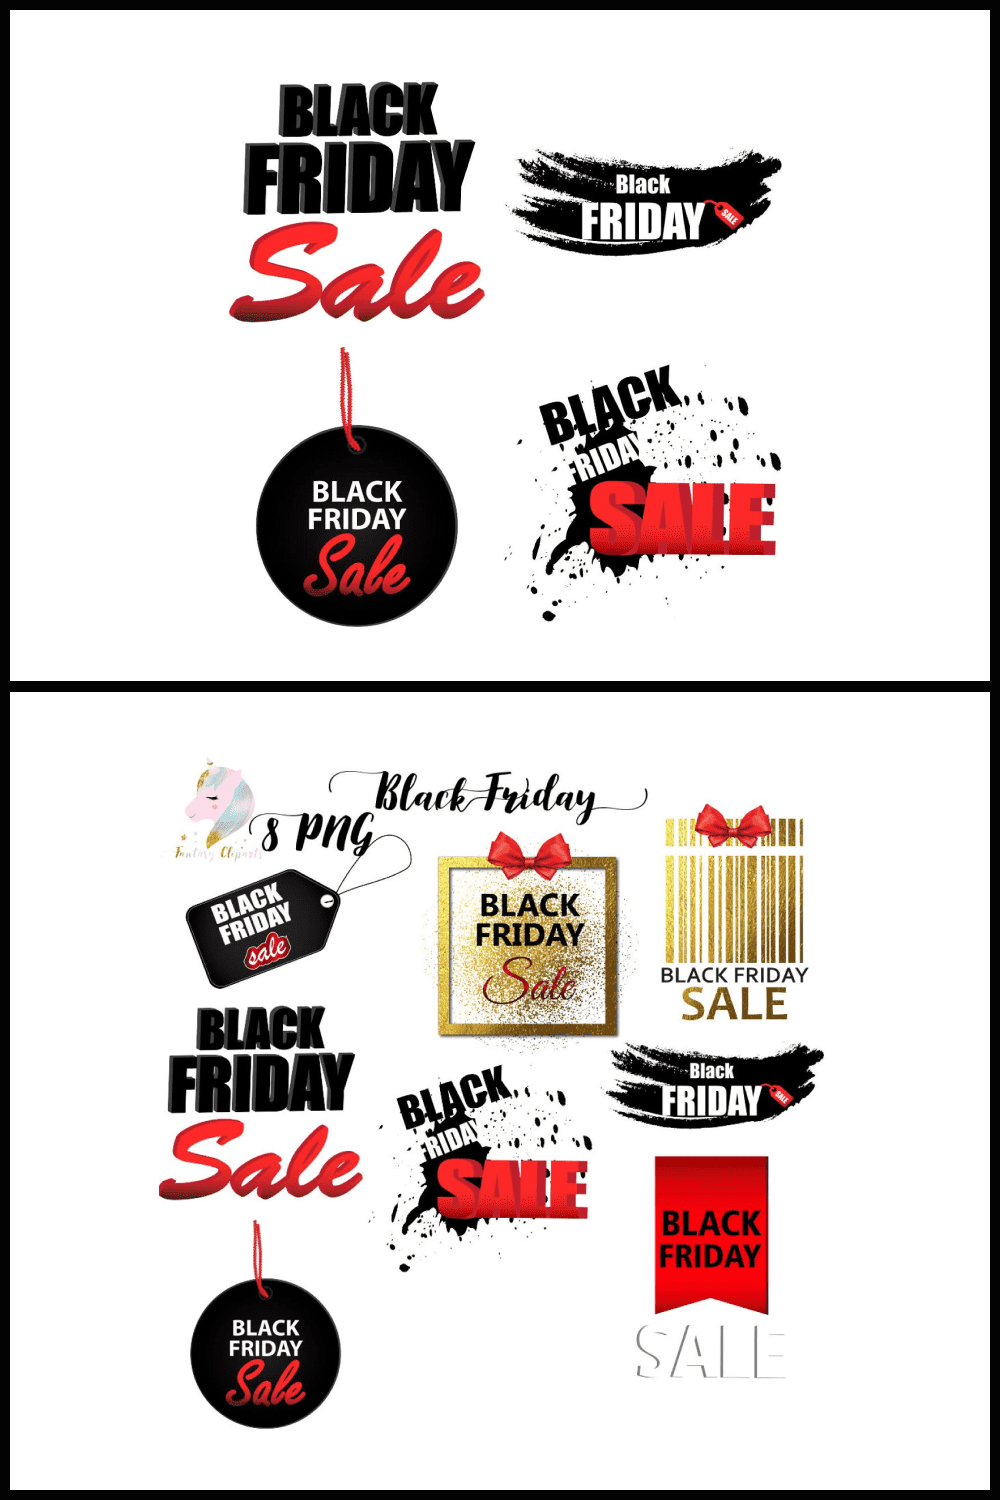 Collage of clipart for Black Friday and sale.